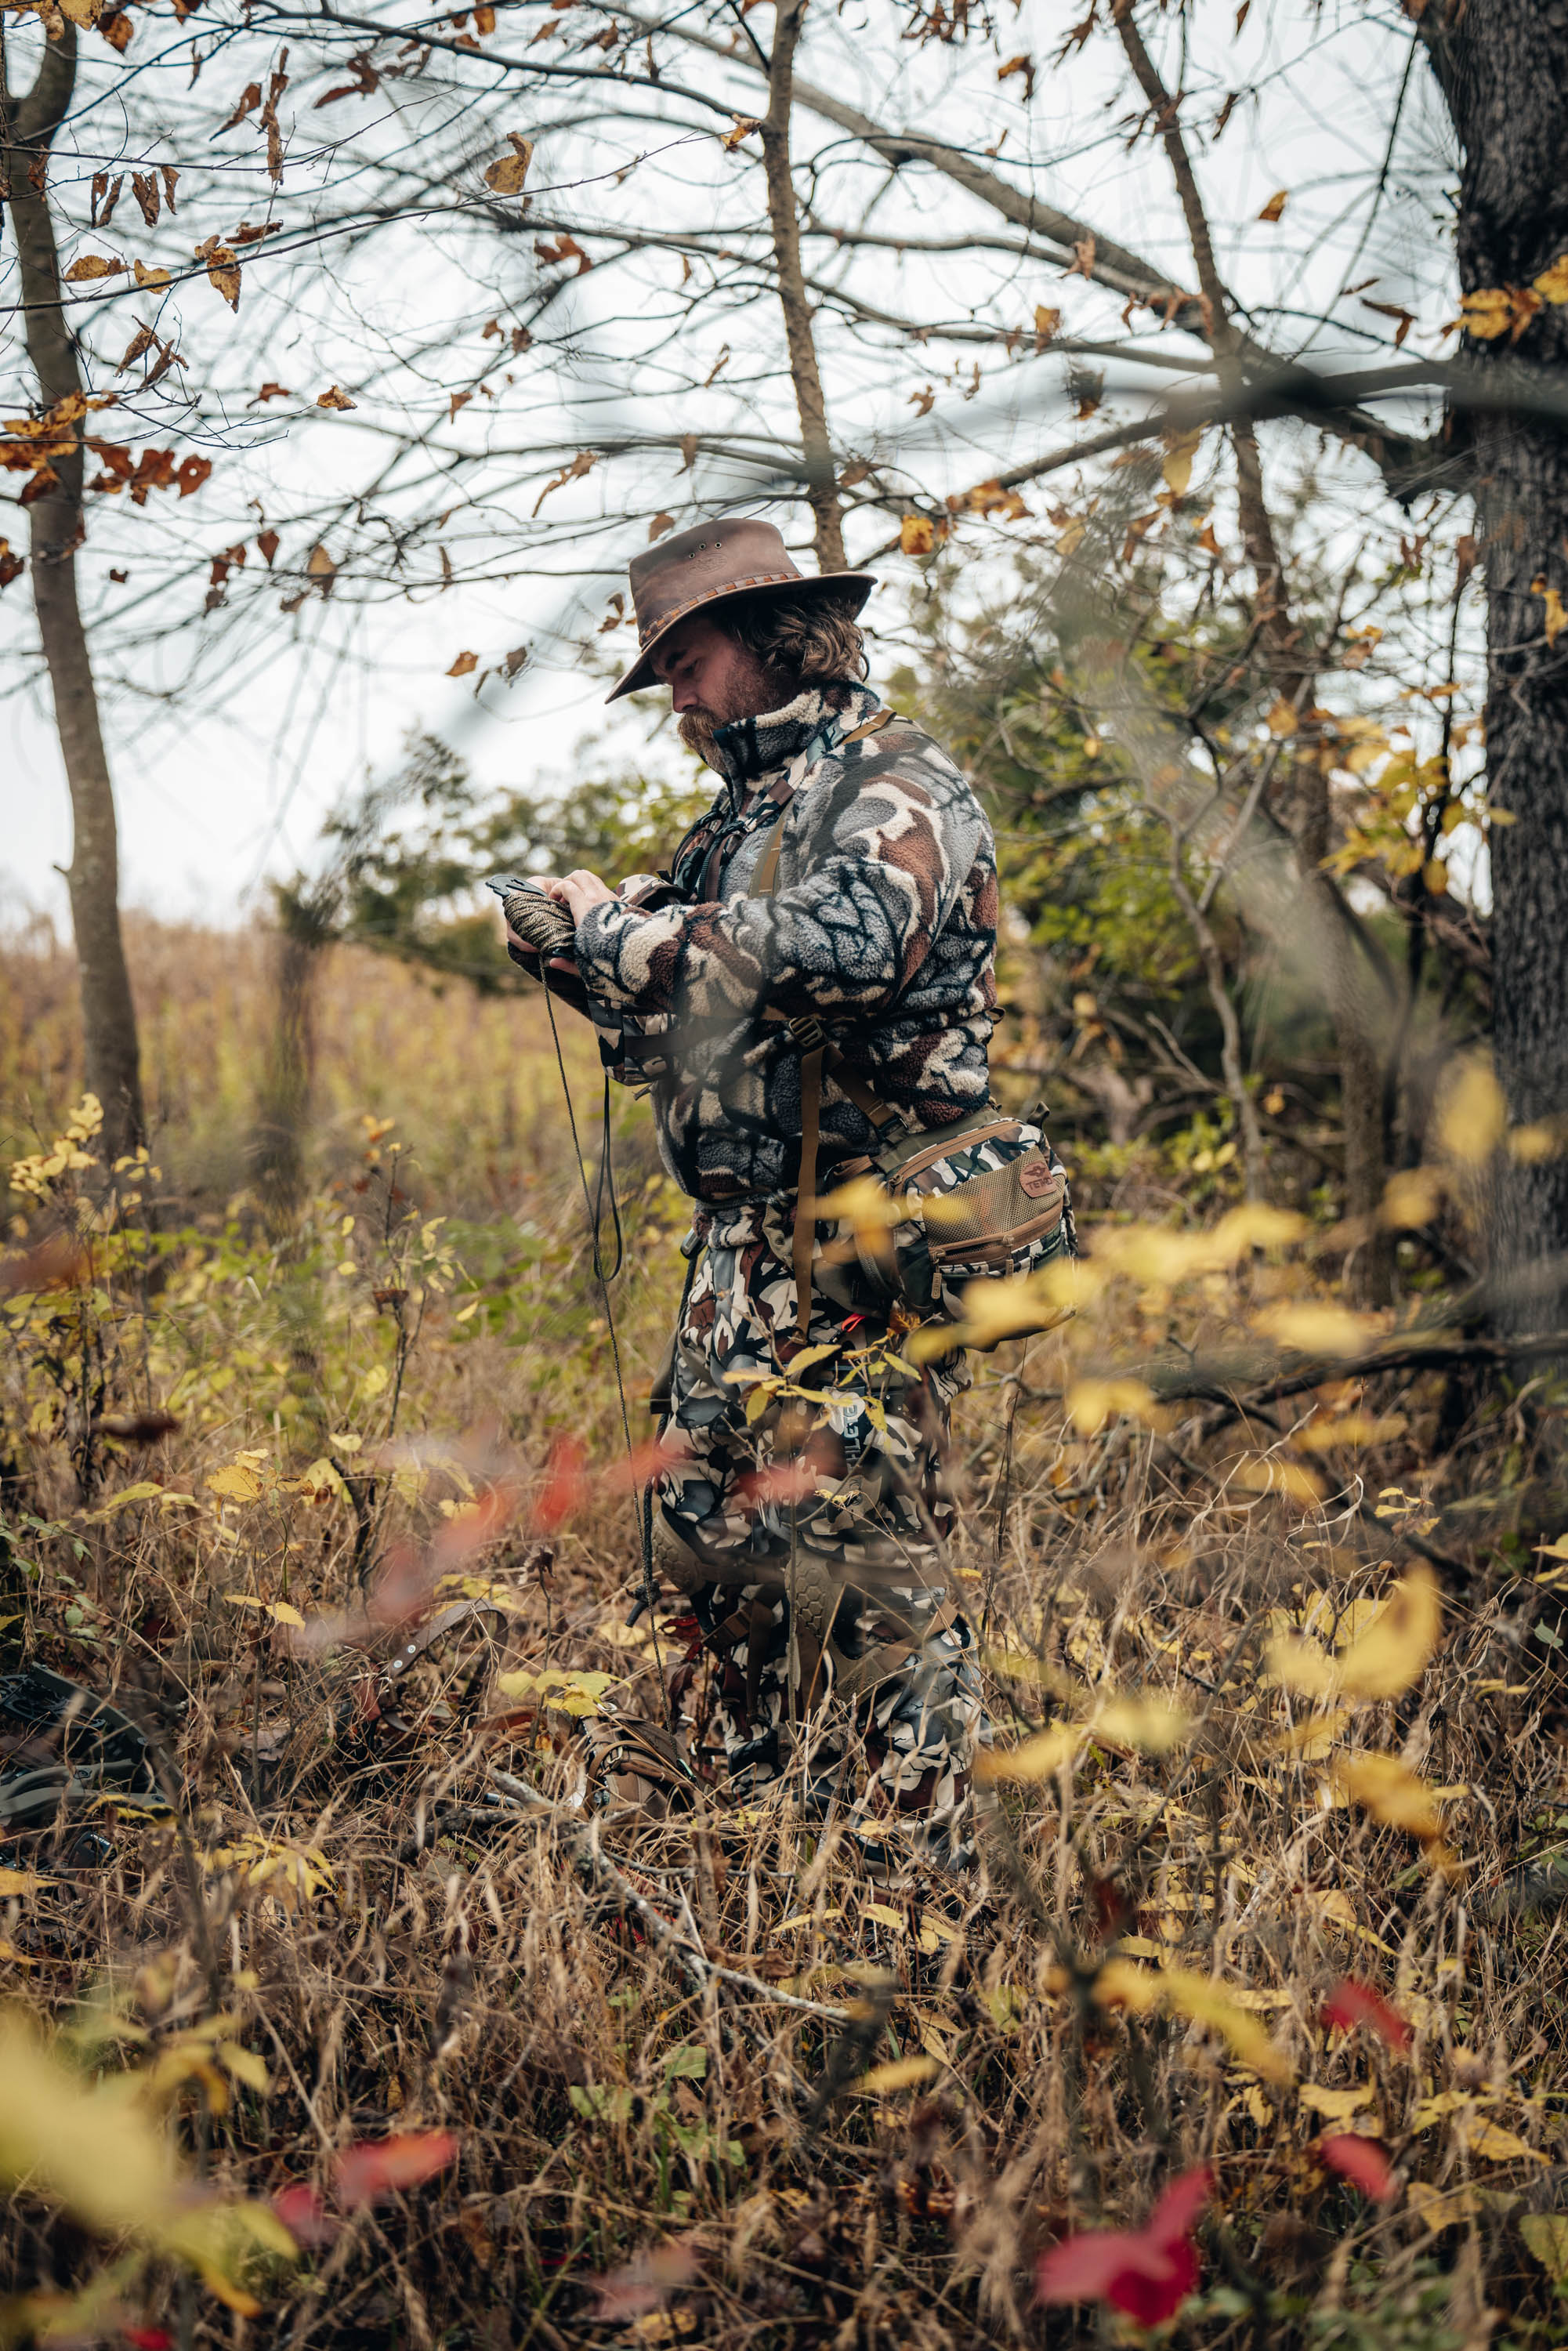 THLETE: Elevate Your Hunting Experience with Advanced Gear